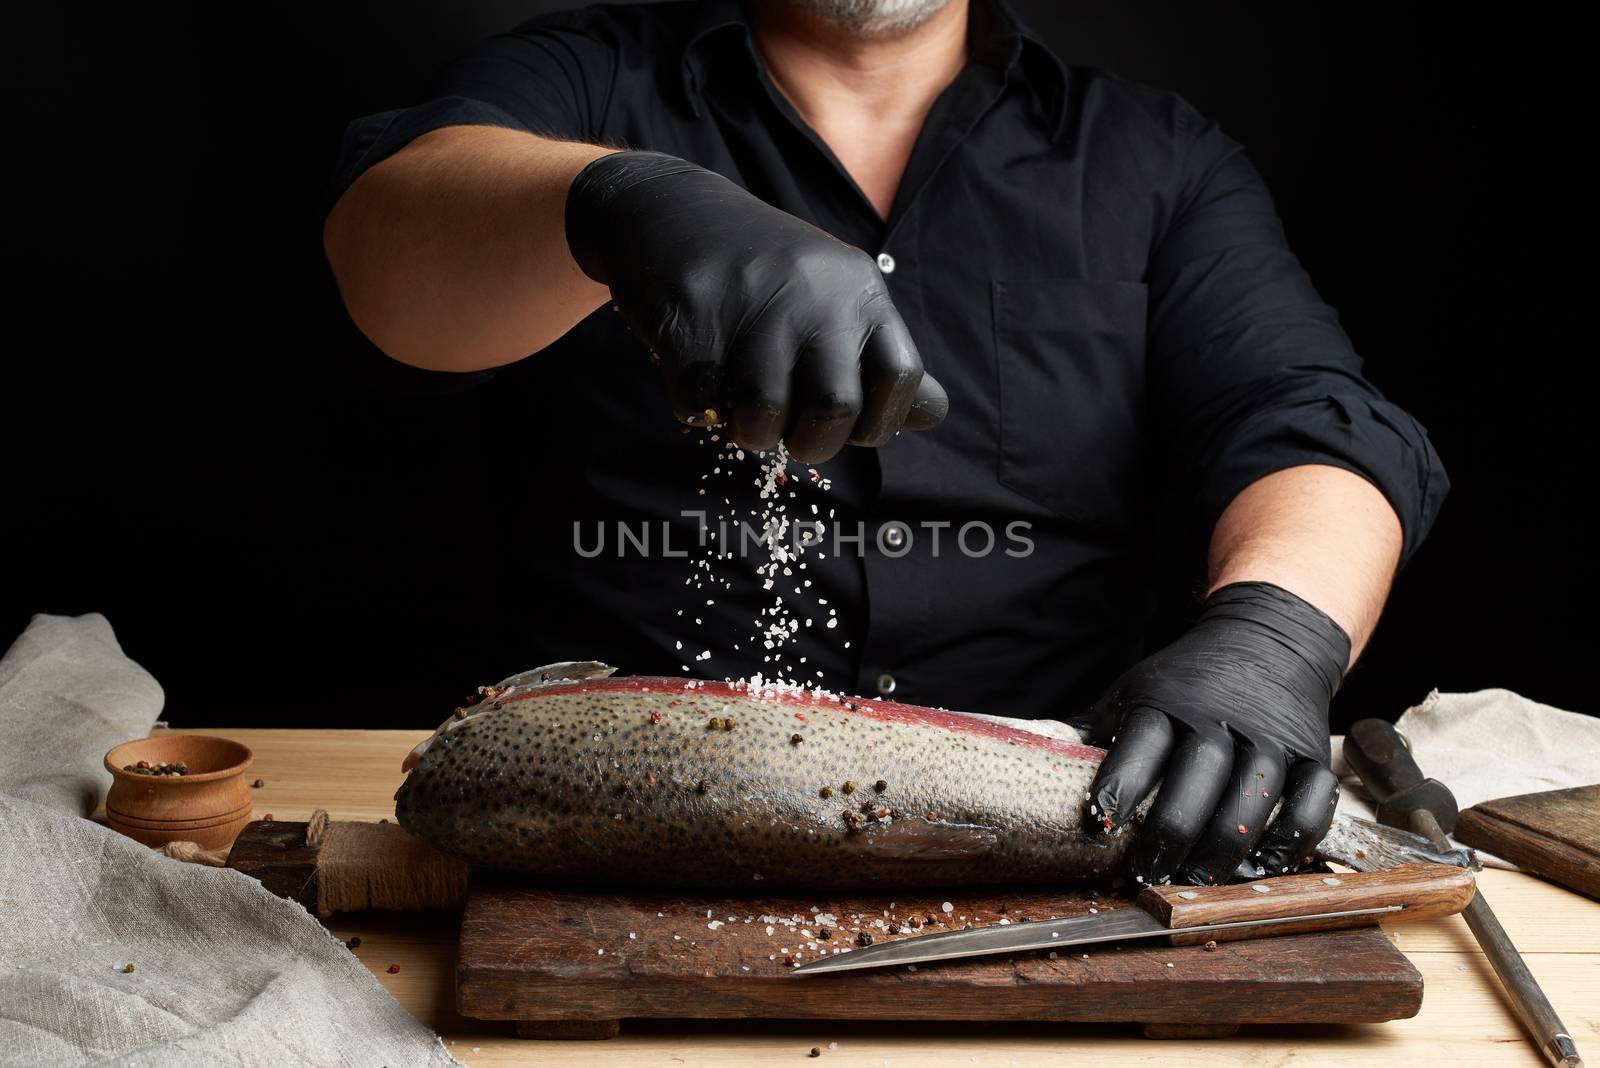 chef in a black shirt and black latex gloves prepares salmon fillet on a wooden cutting board, process of sprinkling with spices and salt, low key